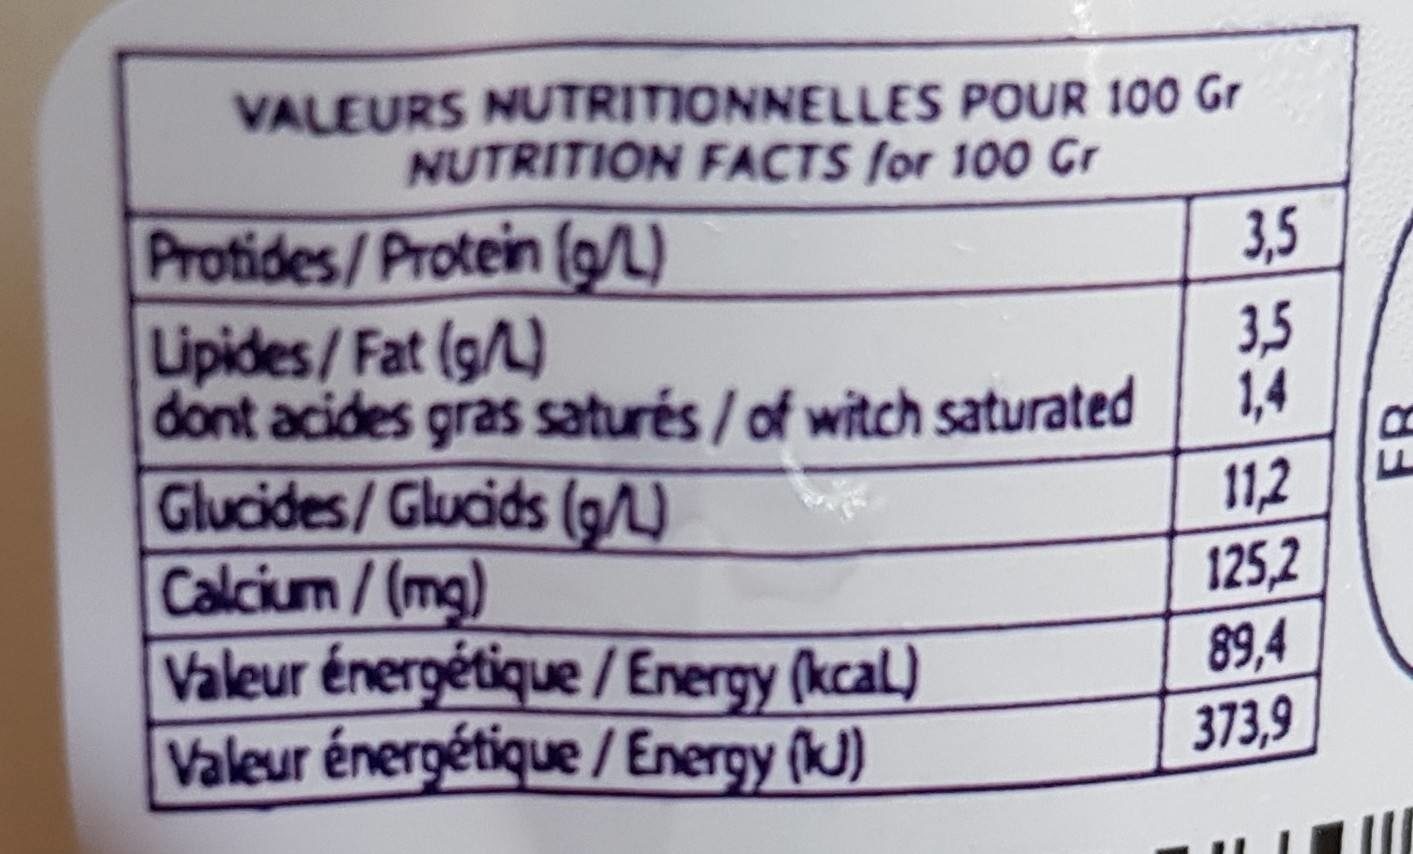 Yaourt artisanal vanille - Nutrition facts - fr